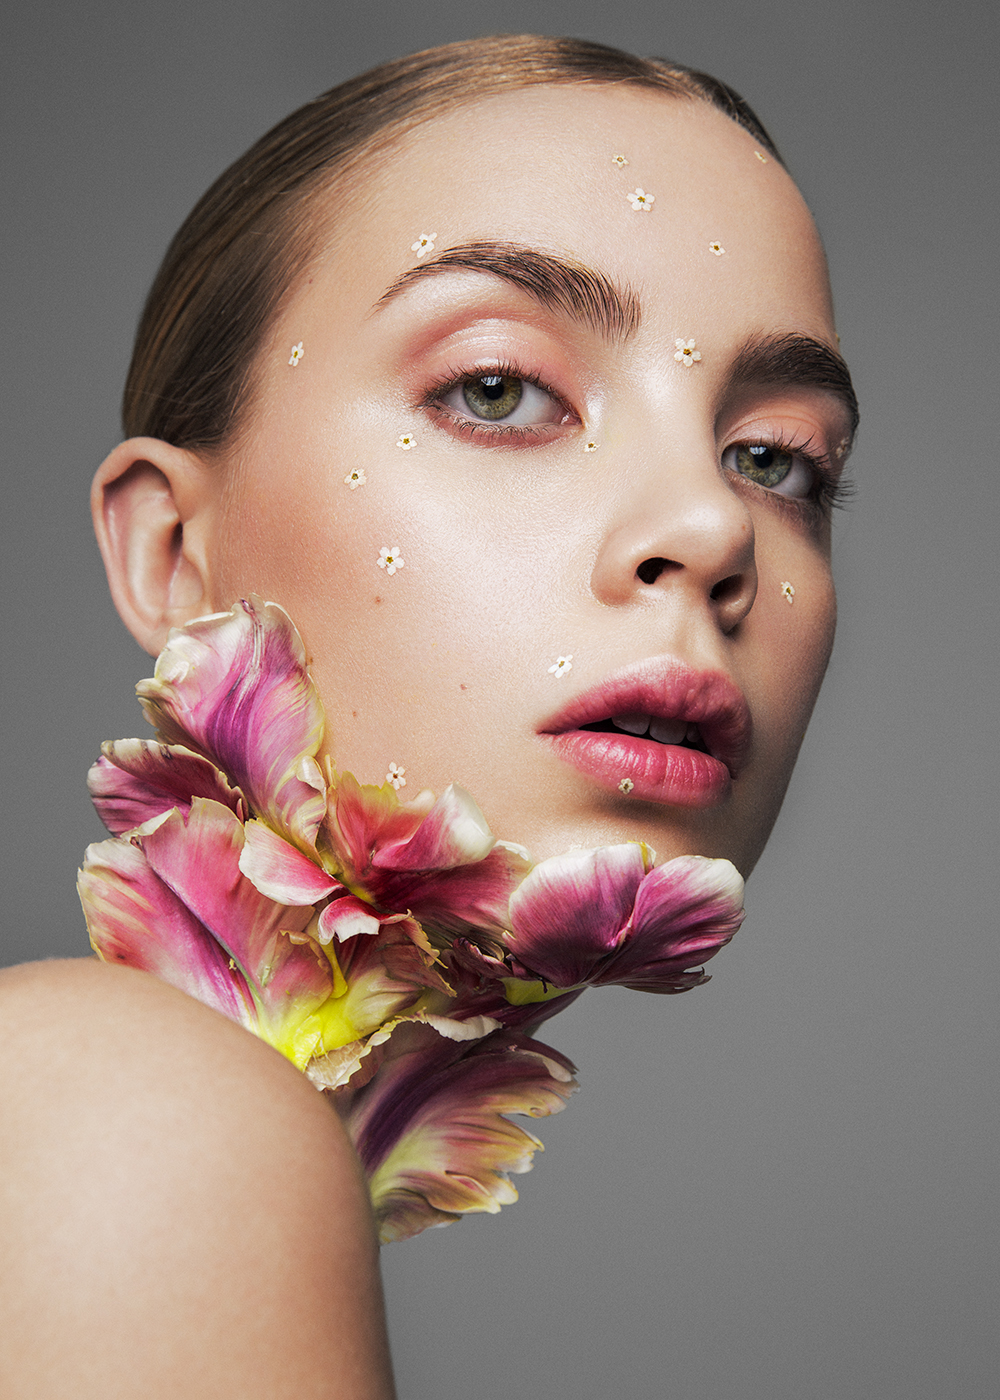 editorial beauty ellen simone Flowers Forget Me Not makeup beautyeditorial Fashion  swedish girl  pink